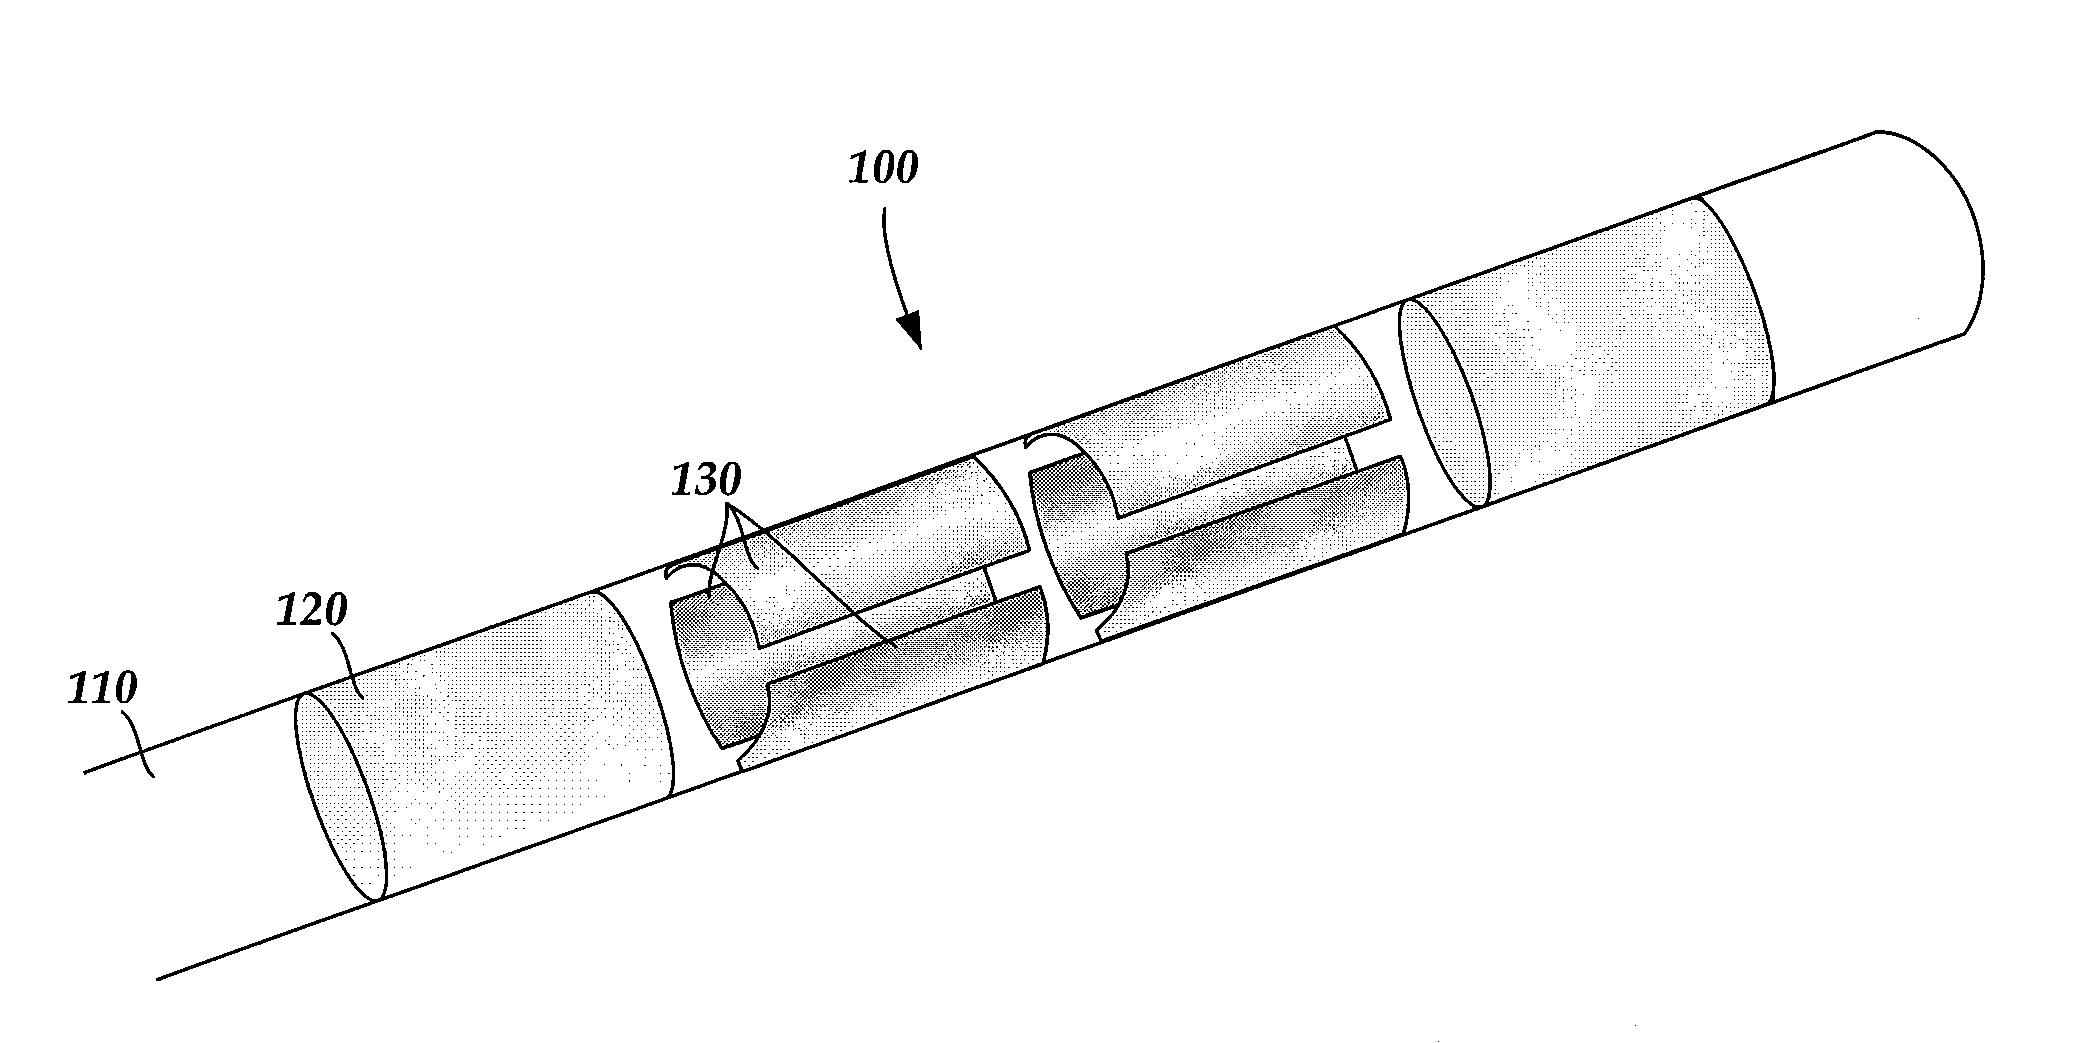 Systems and leads with a radially segmented electrode array and methods of manufacture